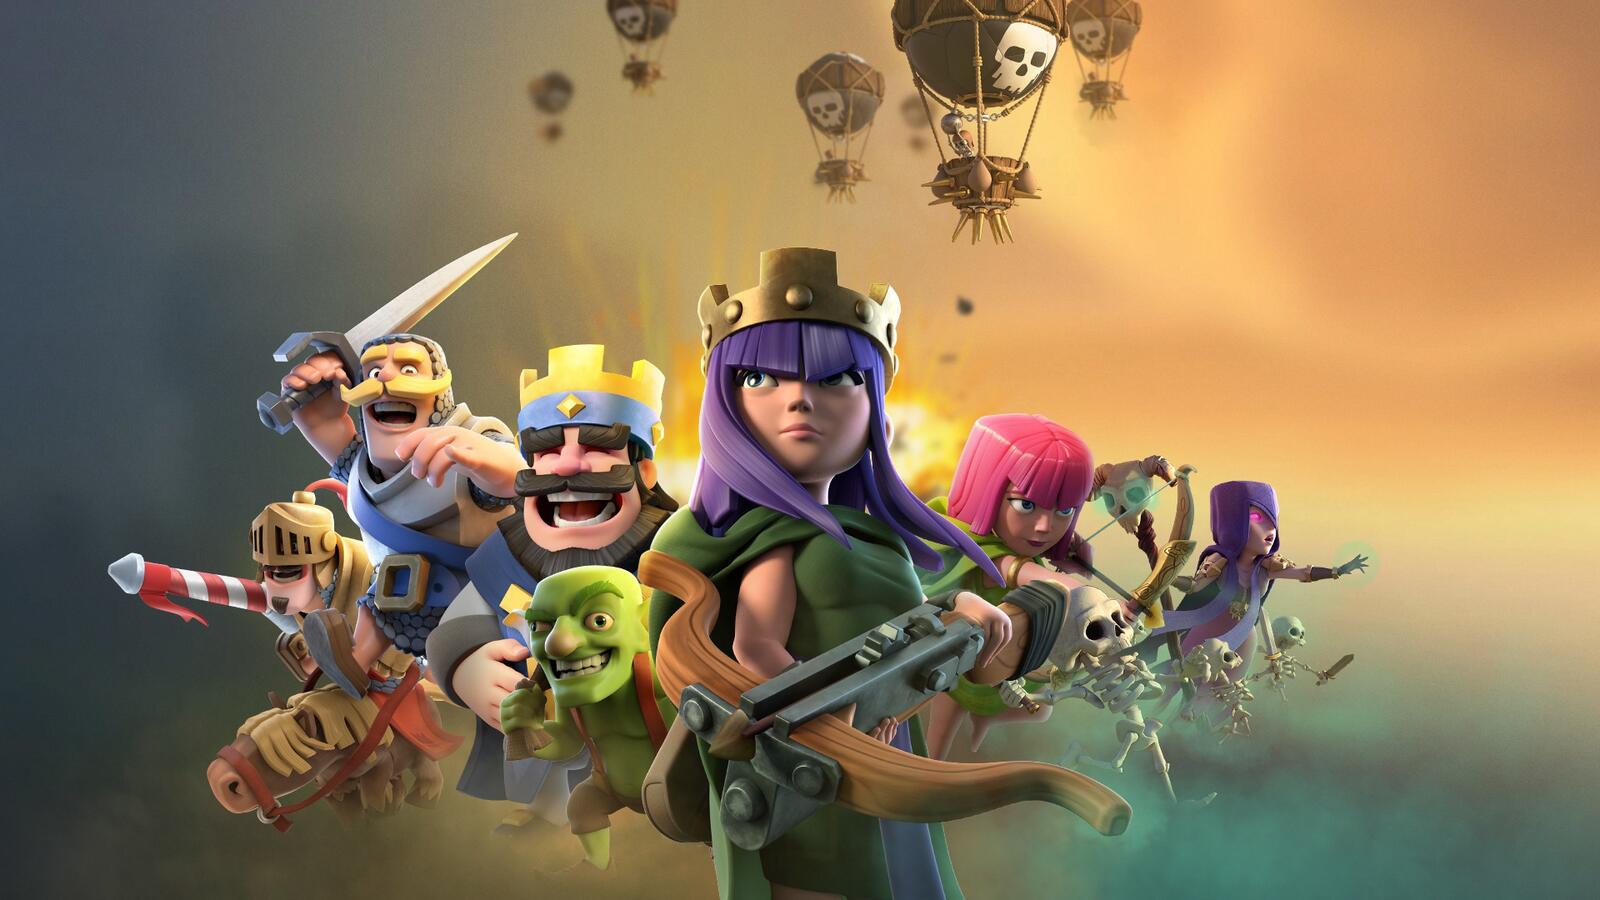 Wallpapers games supercell Clash Royale on the desktop